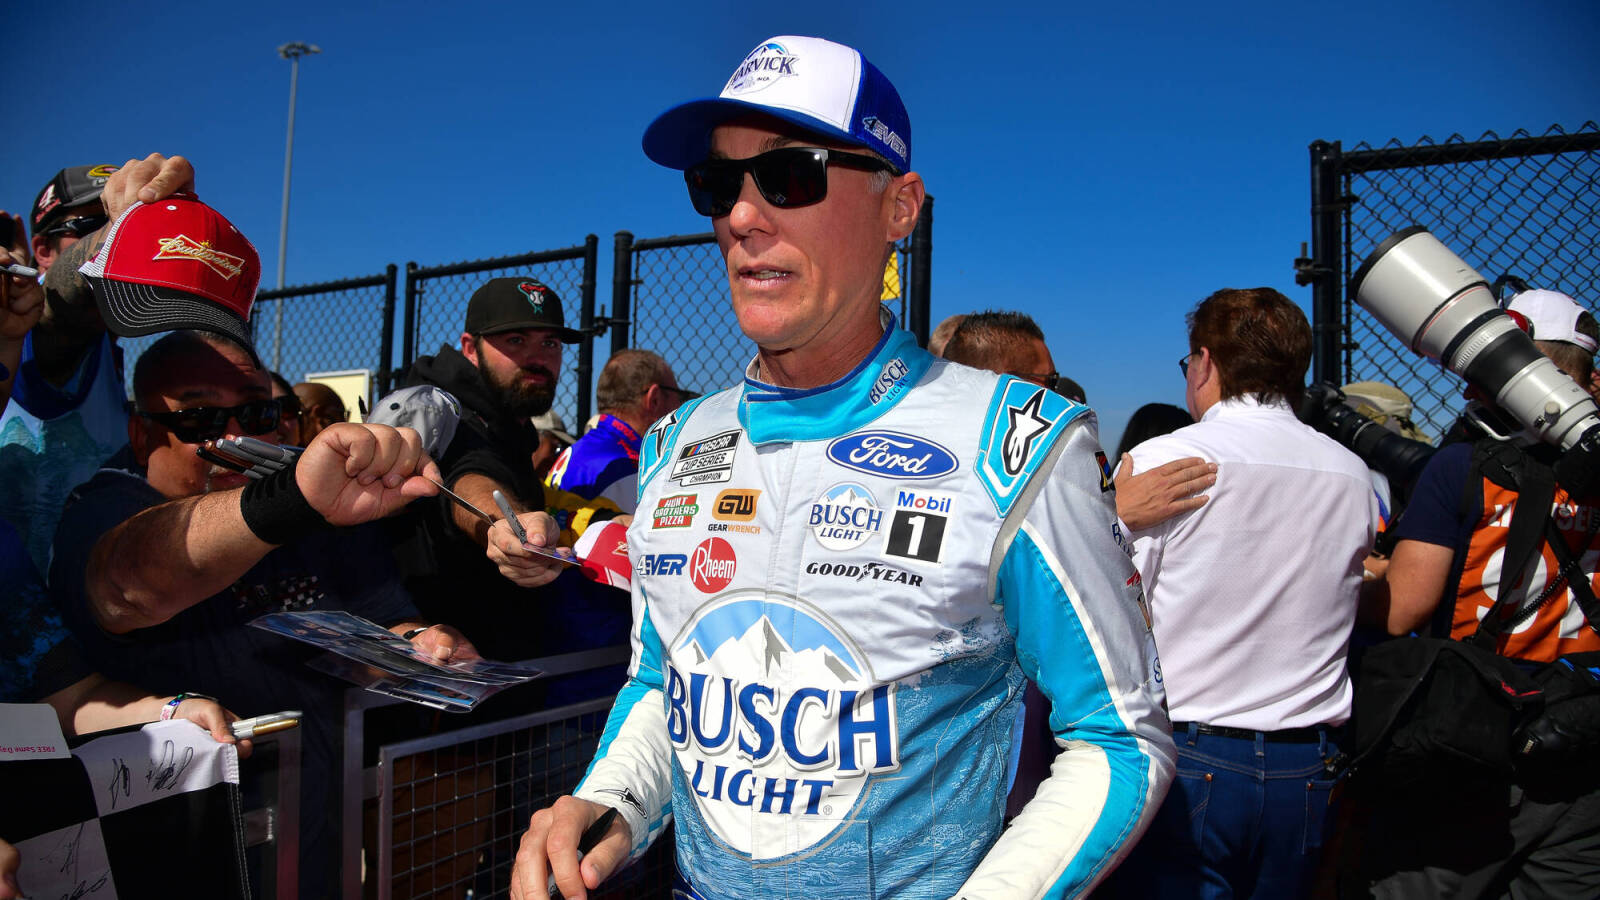 Kevin Harvick gives surprising choice for driver who should have highest level of concern